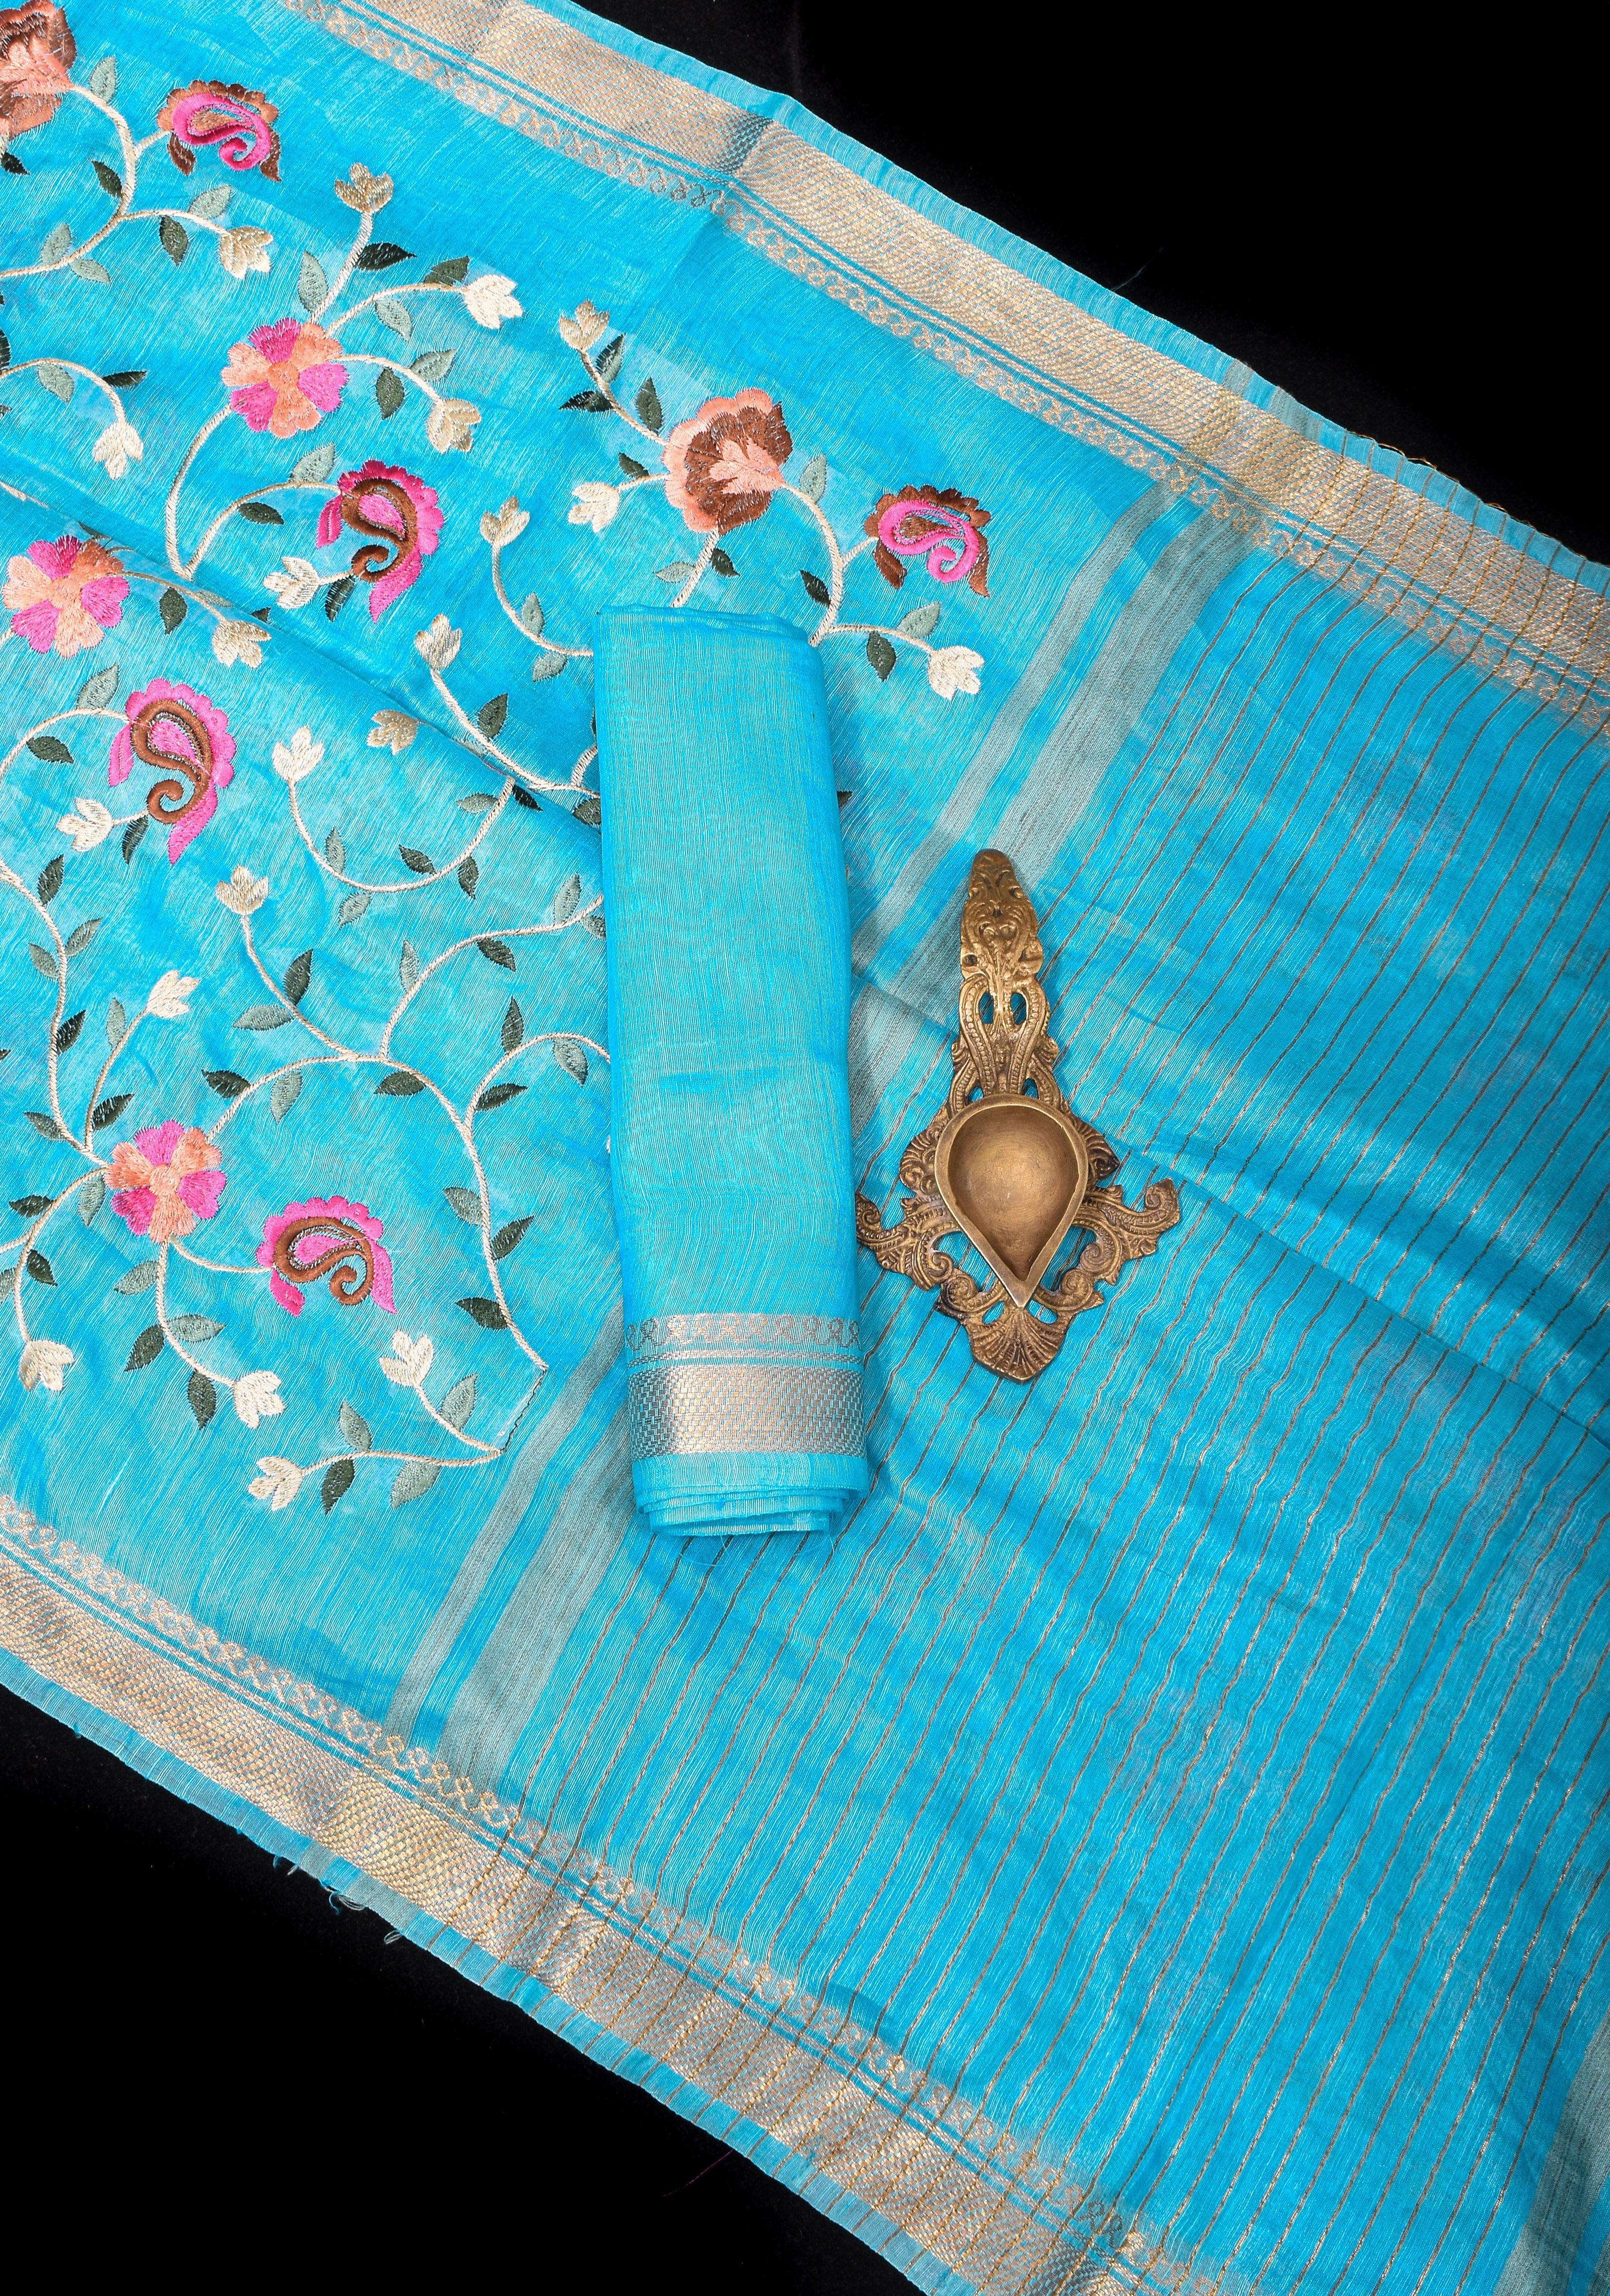 Floral Jaal embroidery on Silk Linen In Blue with woven zari borders